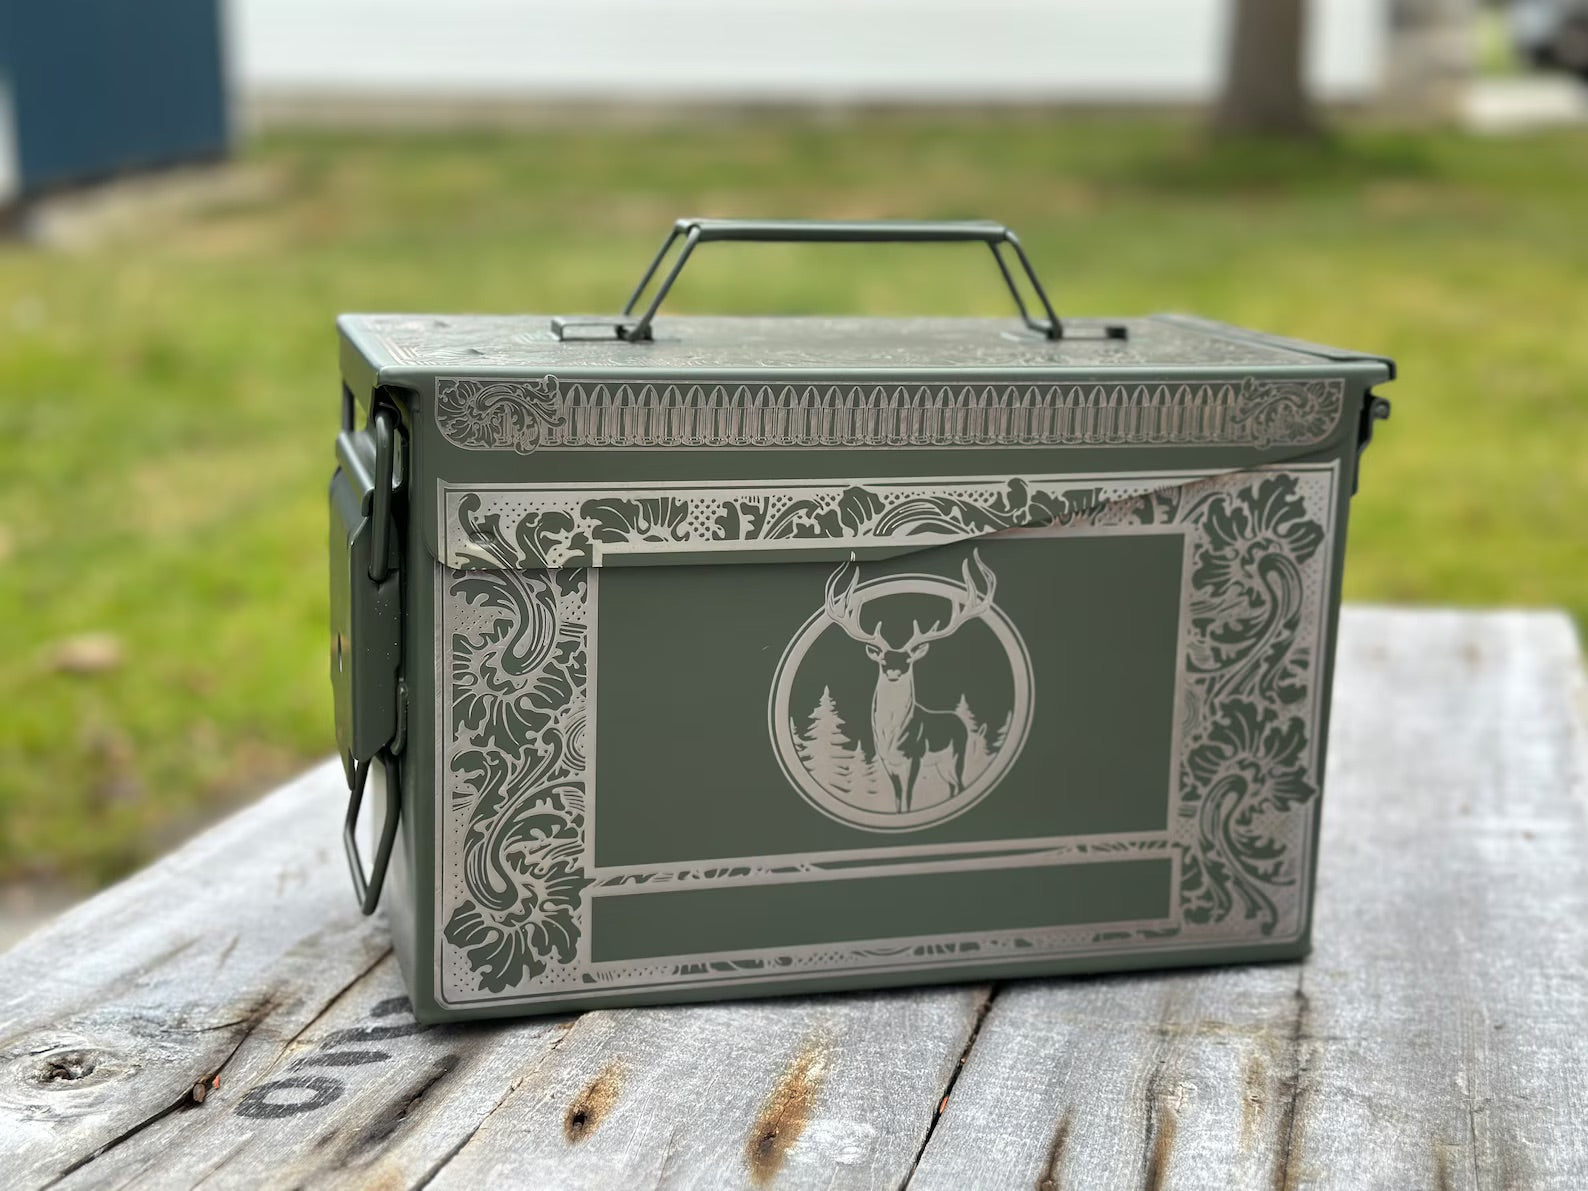 Ultimate Deer Hunter's Rack - Customized 50 cal ammo can laser engraved on all sides